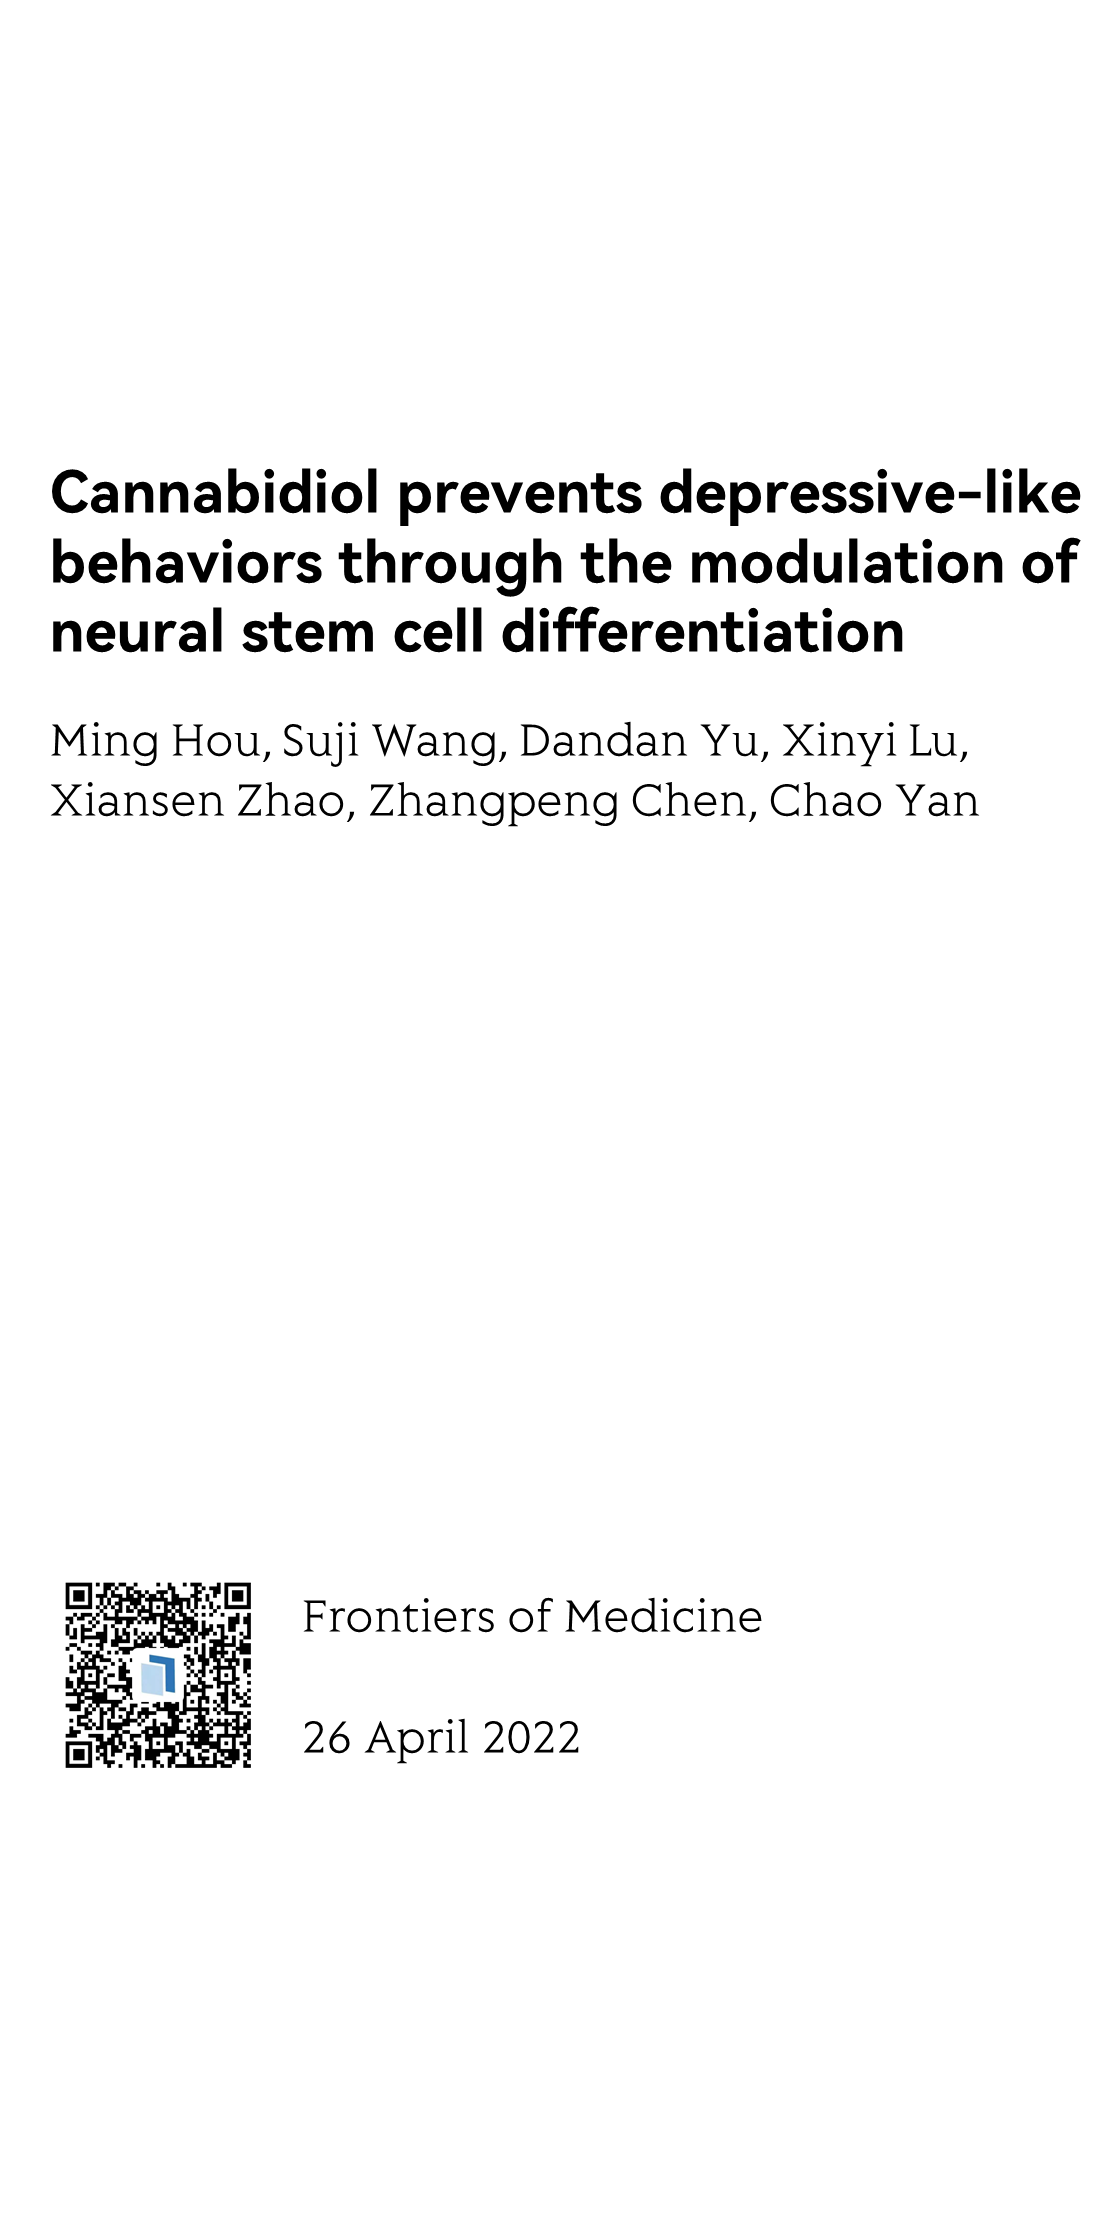 Cannabidiol prevents depressive-like behaviors through the modulation of neural stem cell differentiation_1